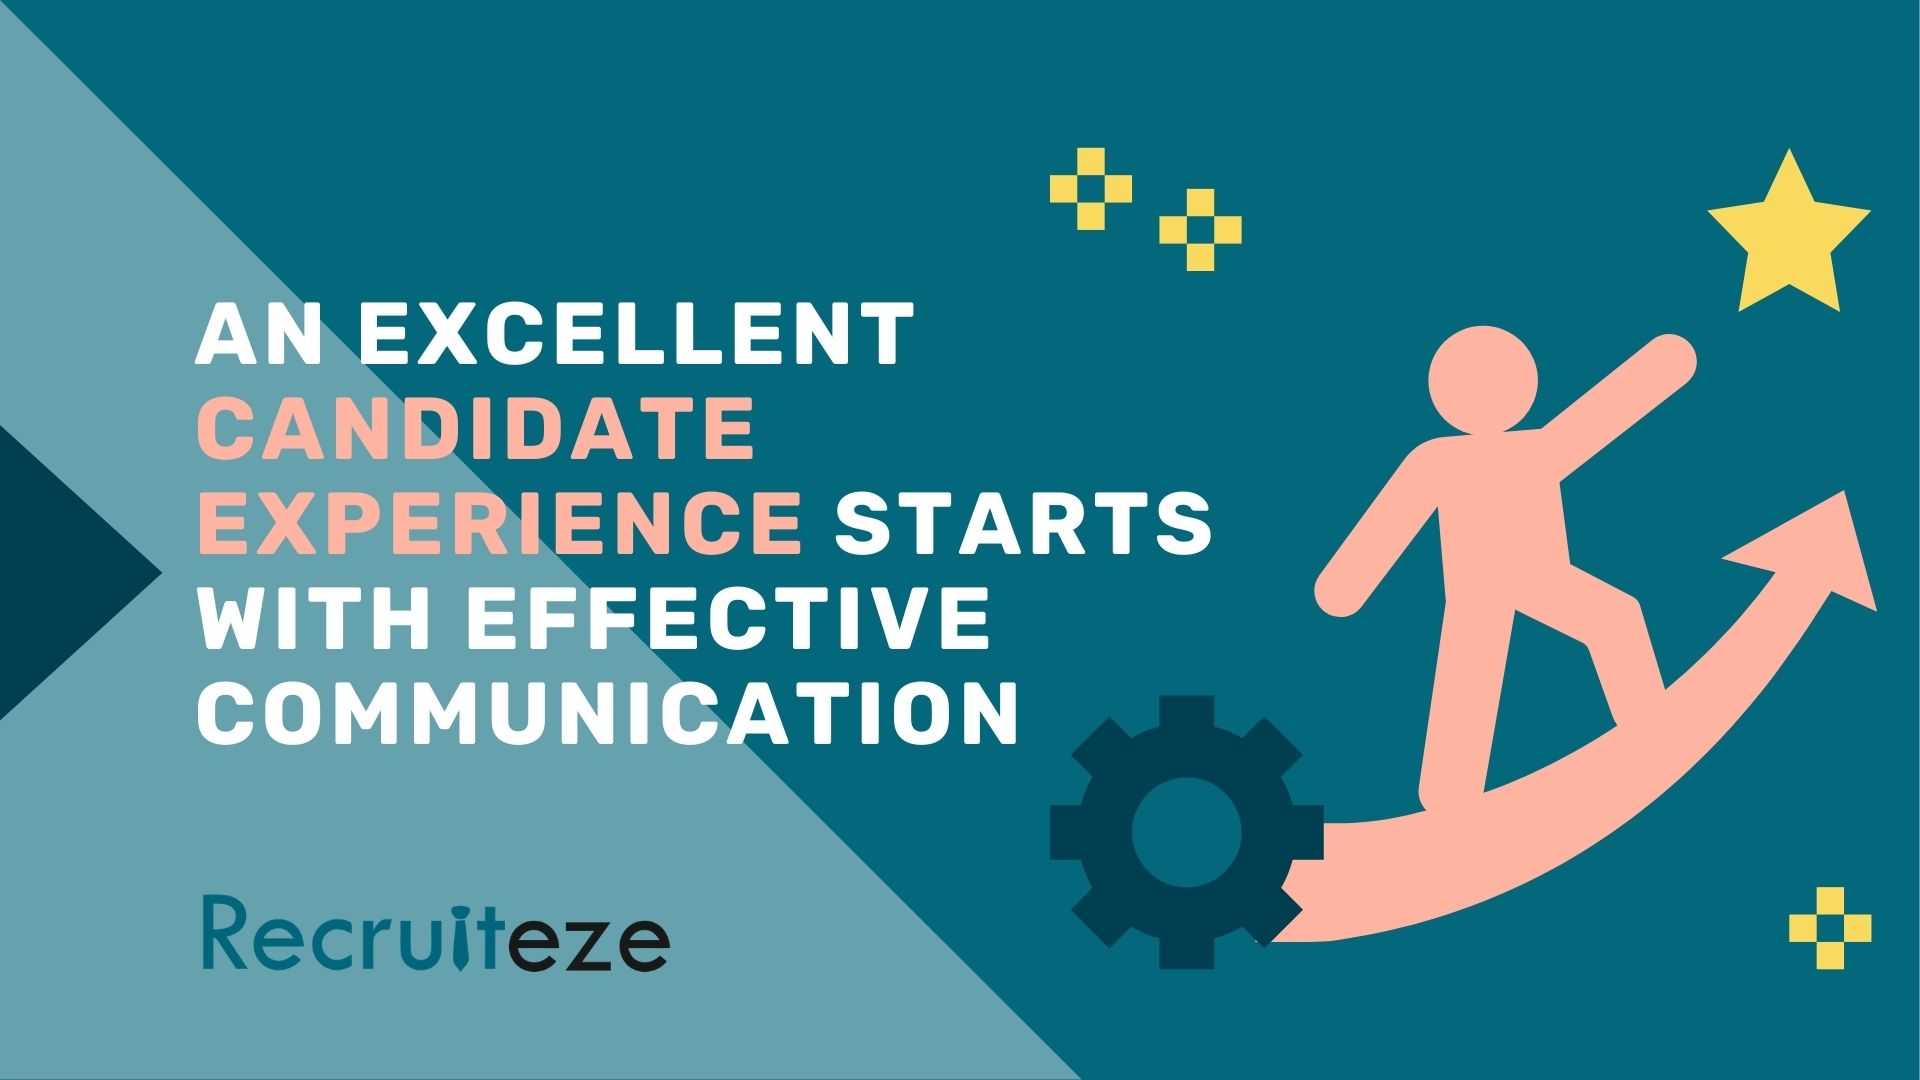 An excellent candidate experience starts with effective communication